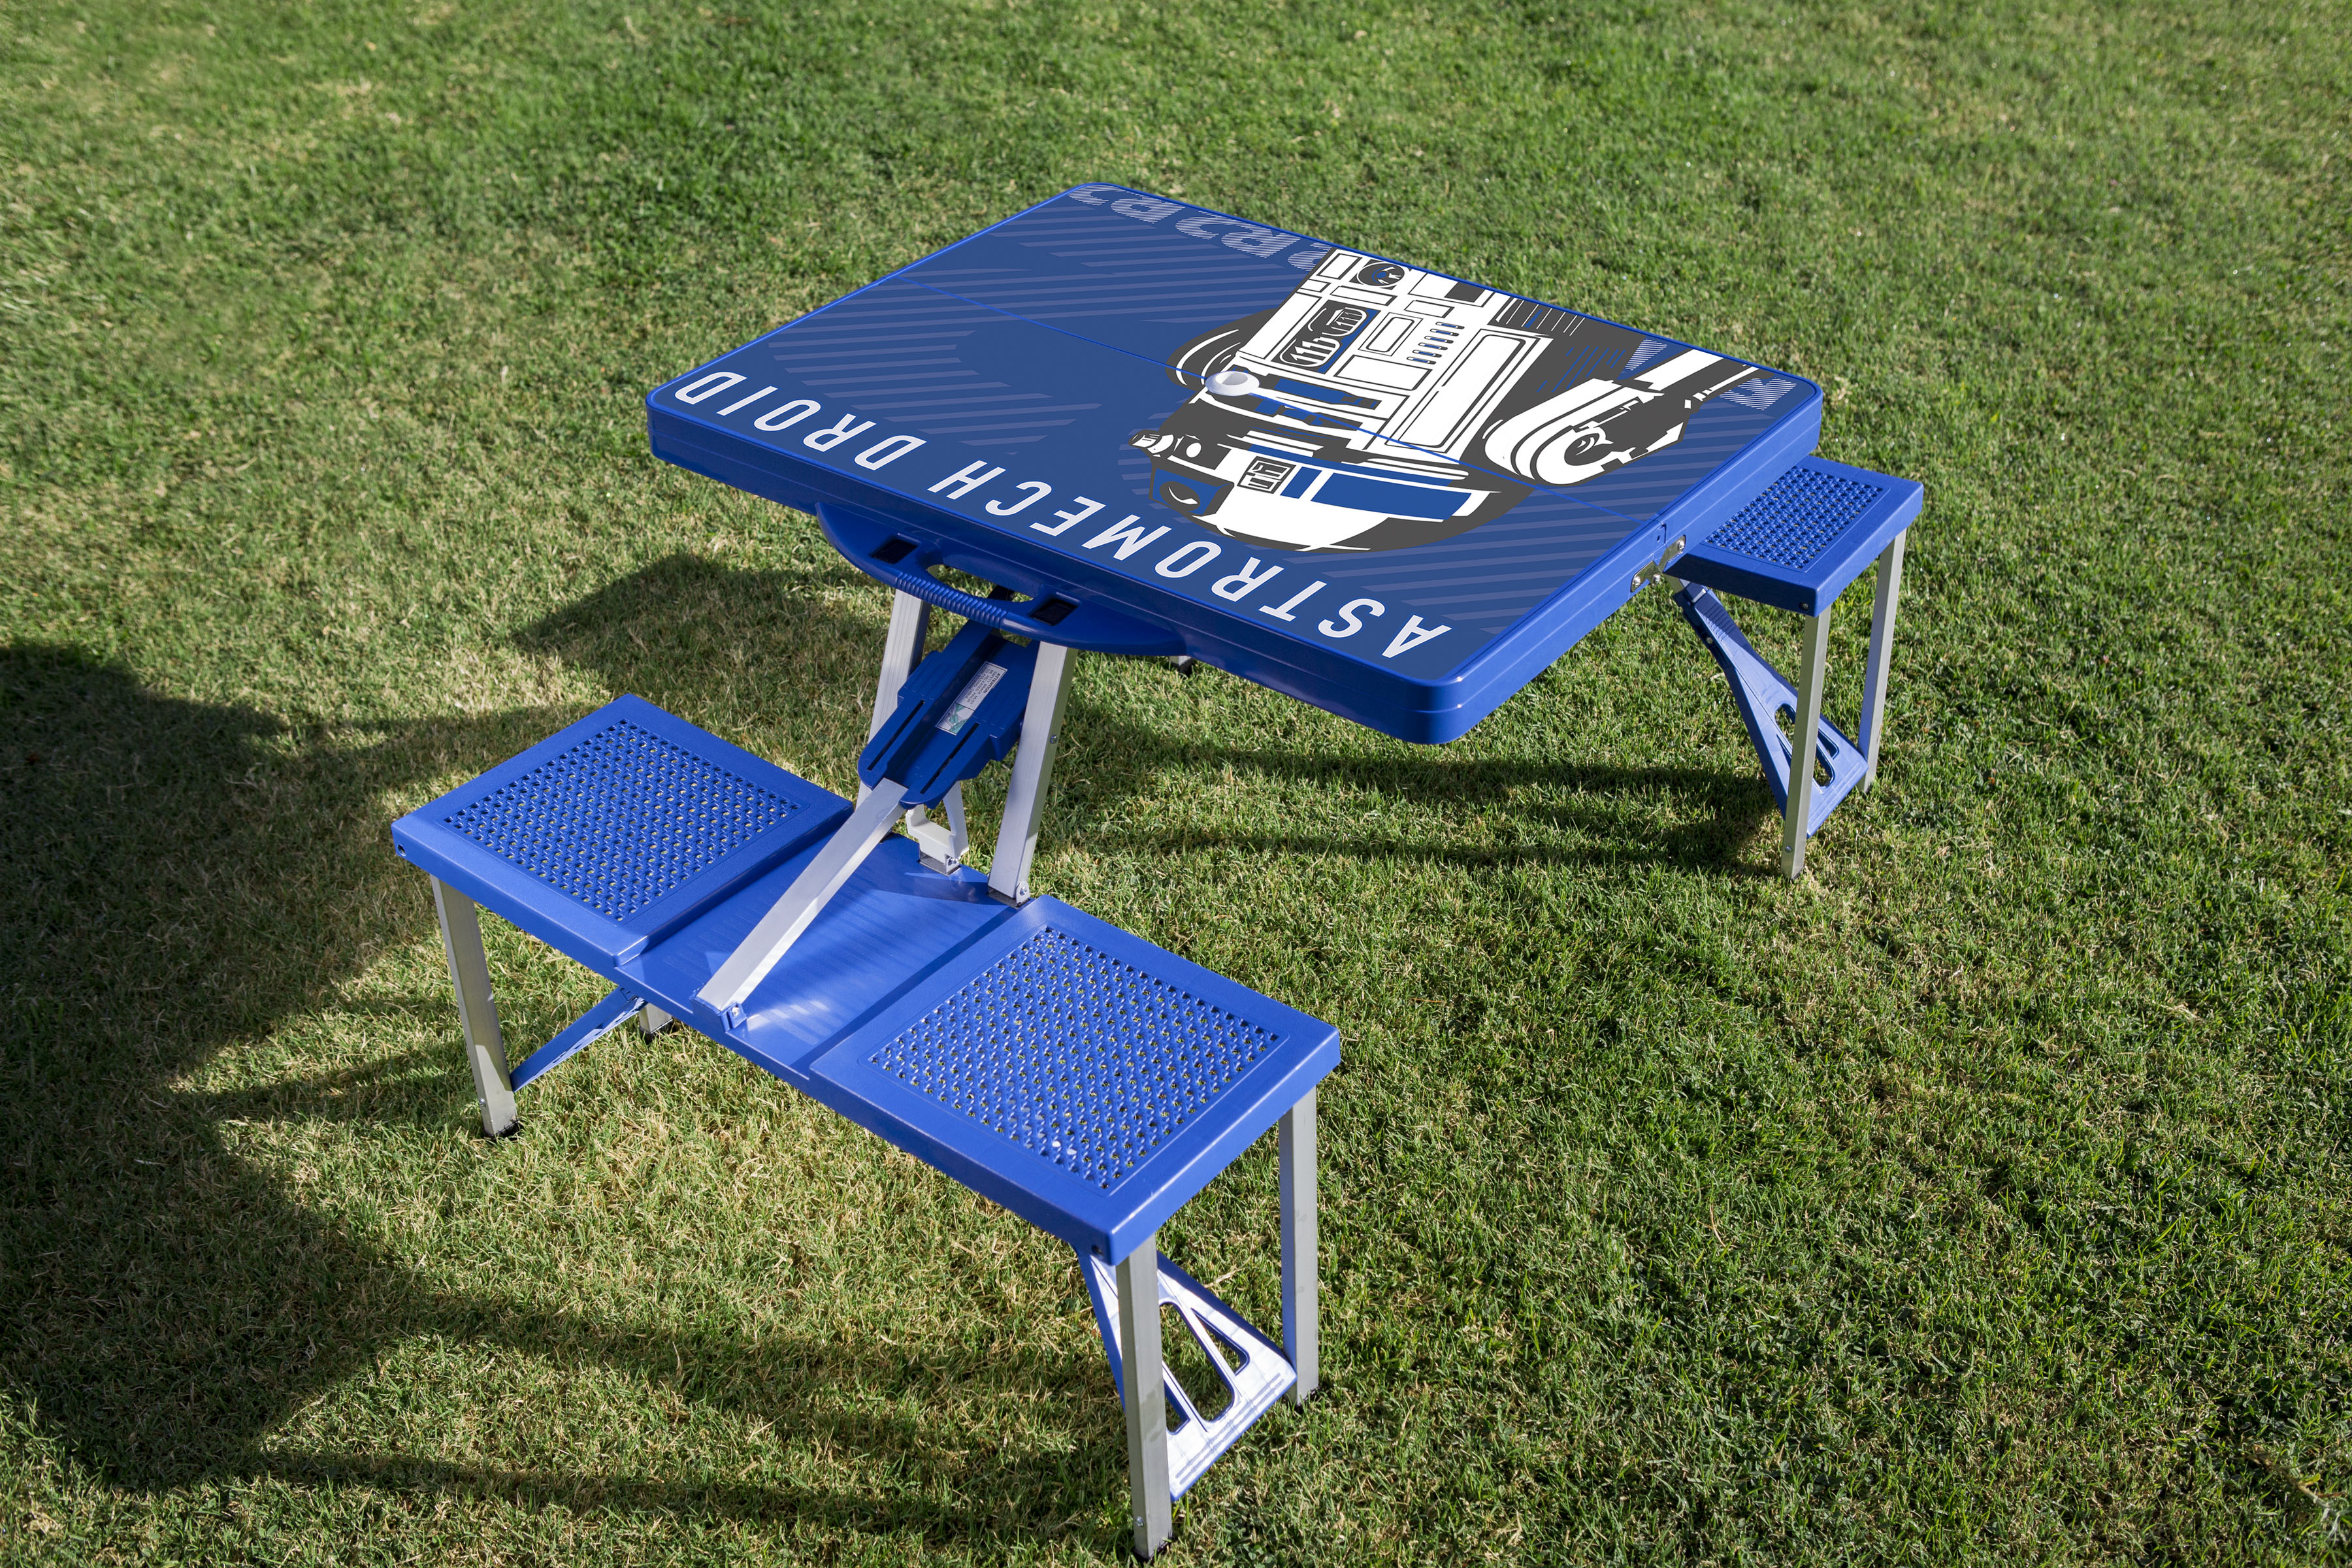 R2-D2 - Star Wars - Picnic Table Portable Folding Table with Seats